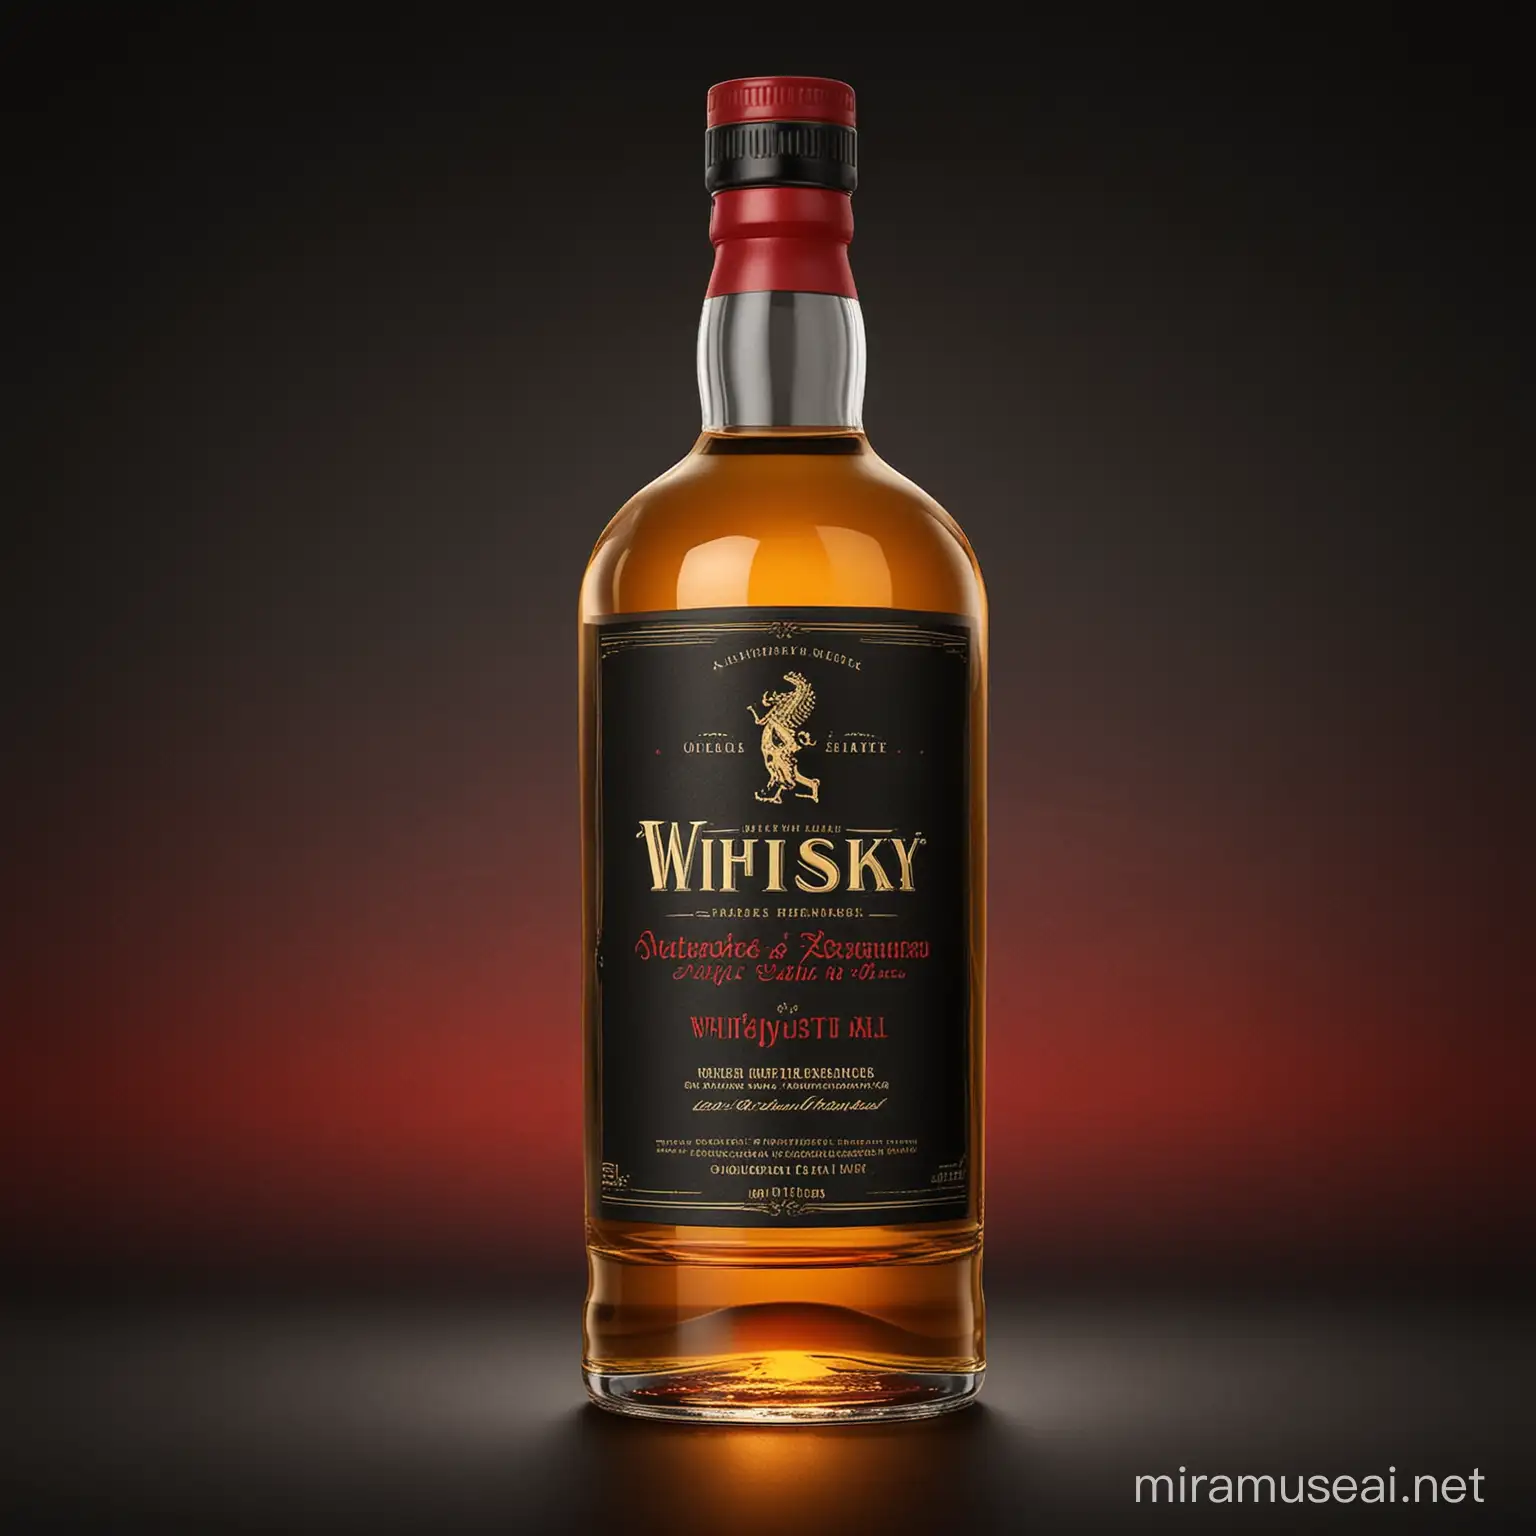 Whisky Label Design Featuring Good Moods with Yellow Black and Red Color Scheme